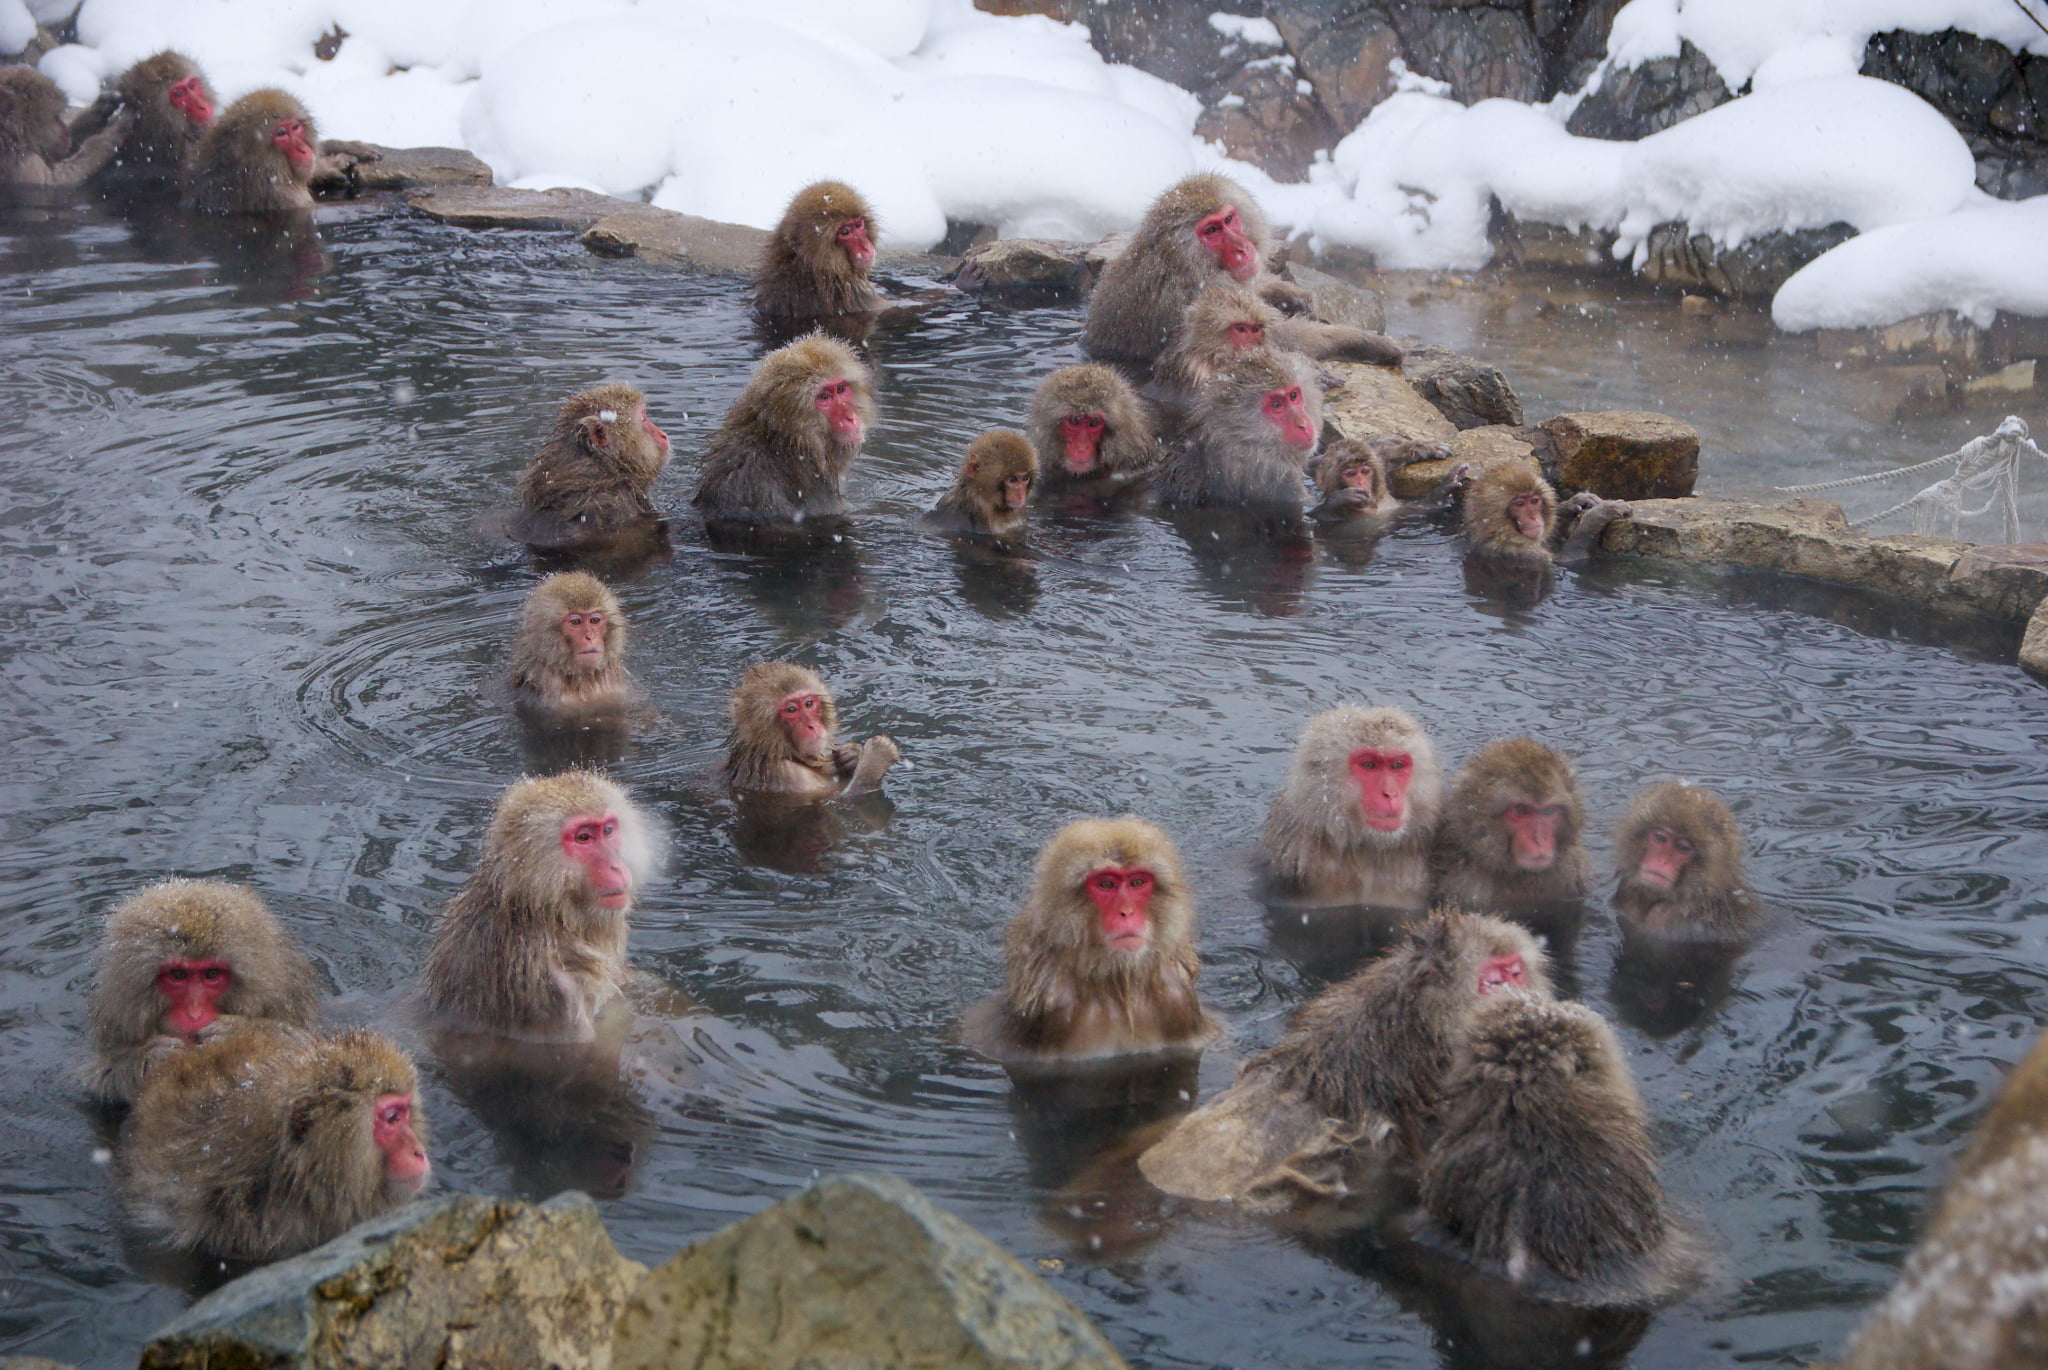 A group of Japanese monkeys taking a rest in a hot spring